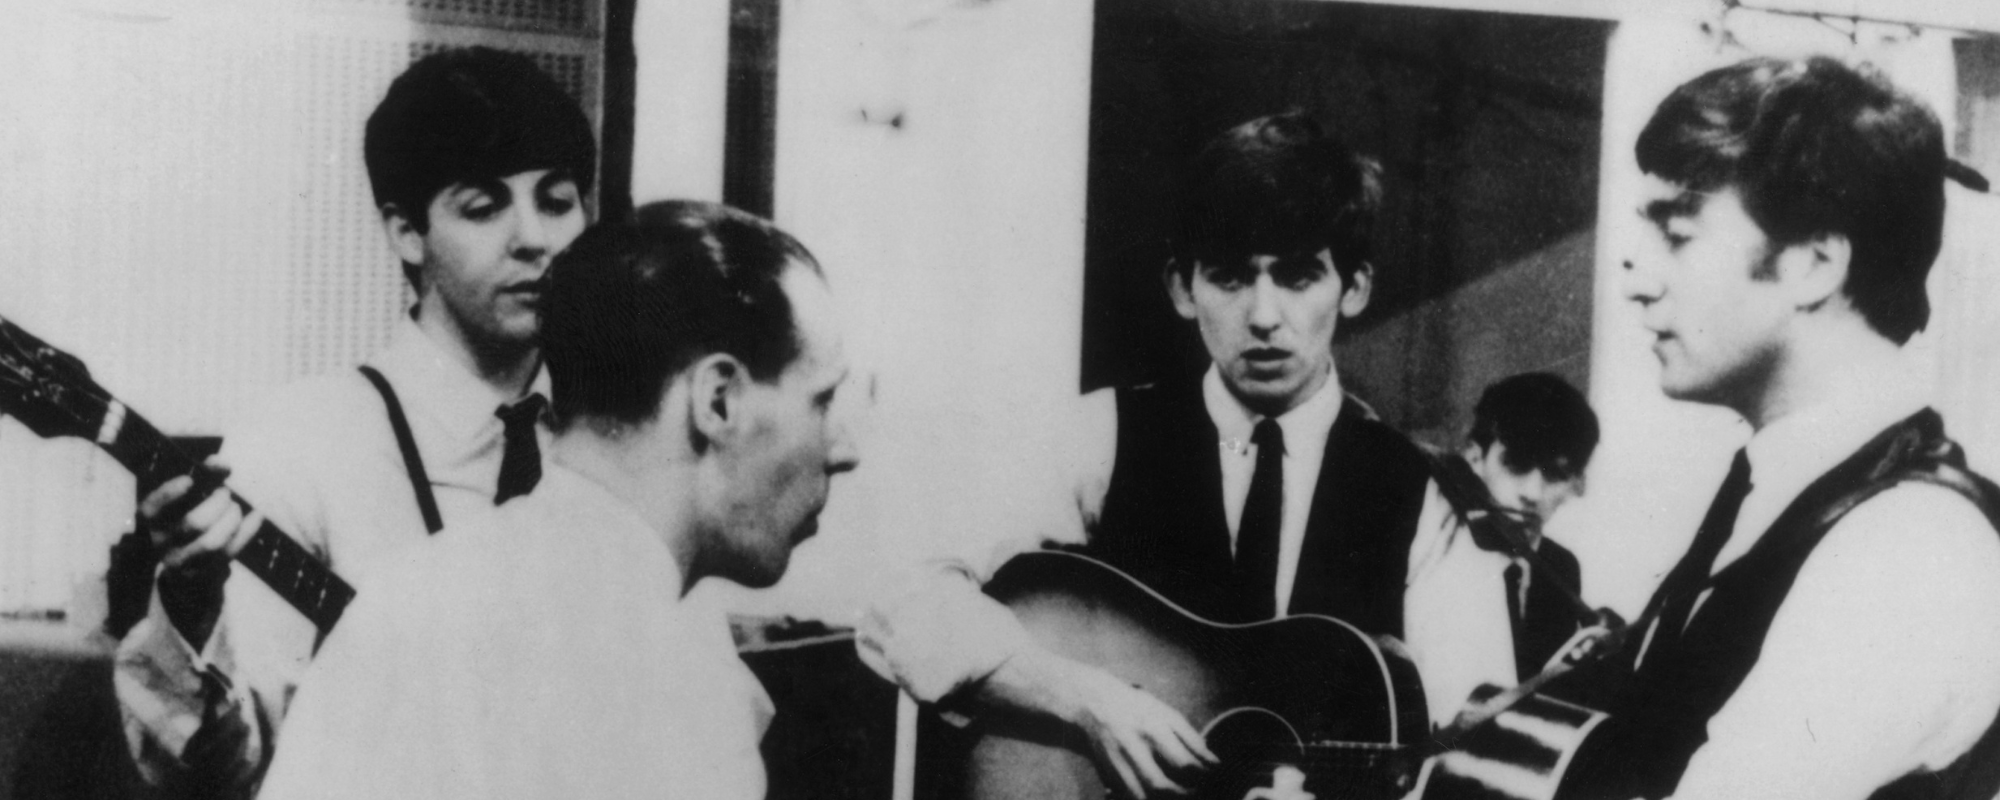 The Not-So-Quiet Beatle: 5 Subtly Brilliant Fab Four Guitar Parts from George Harrison